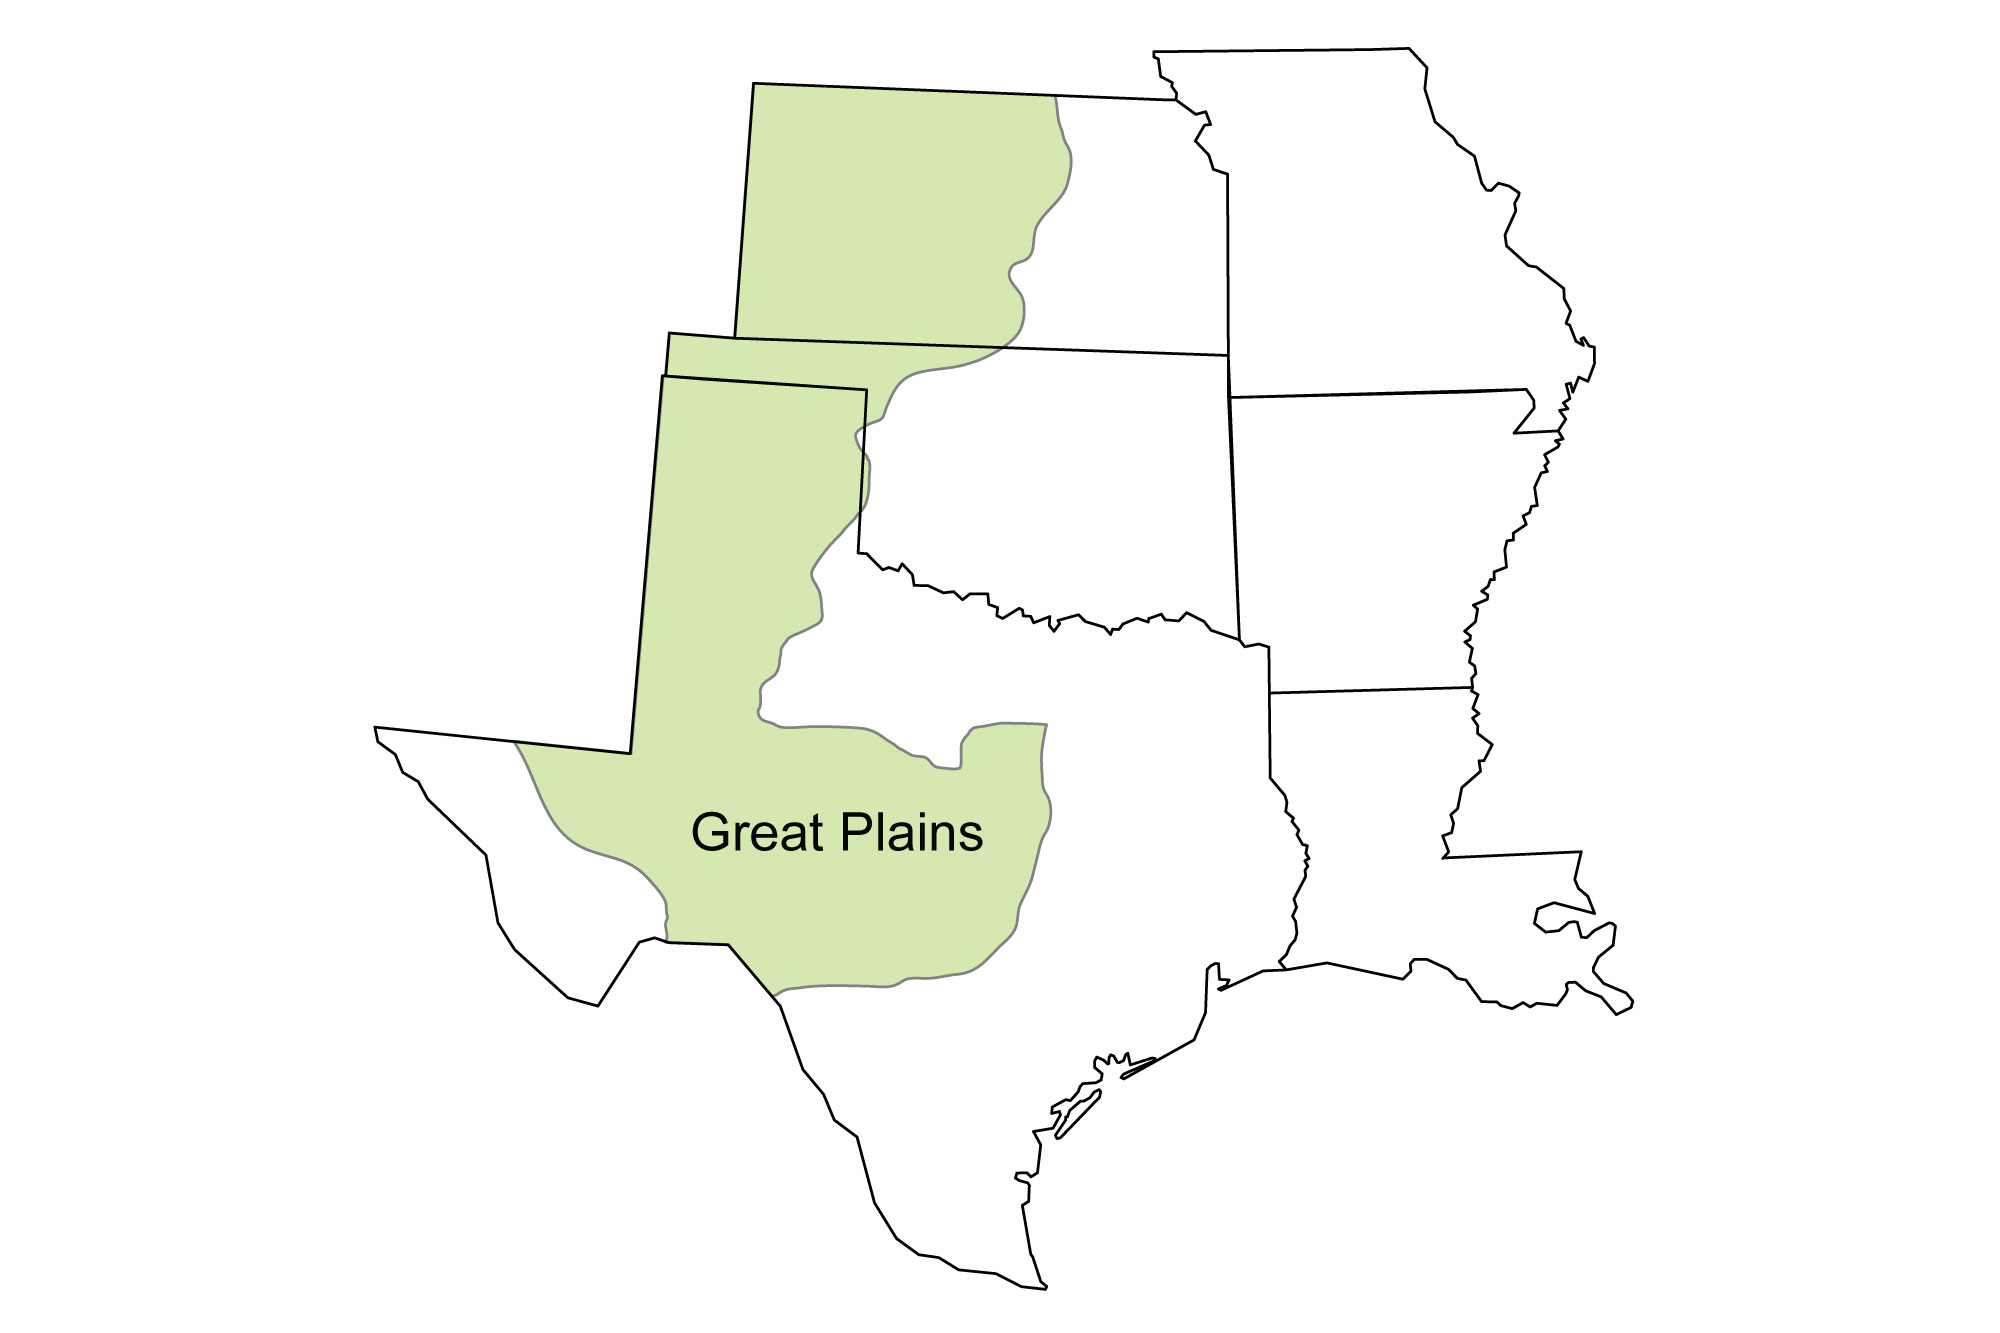 Simple map showing the Great Plains region of the South Central United States, including portions of Texas, Oklahoma, and Kansas.